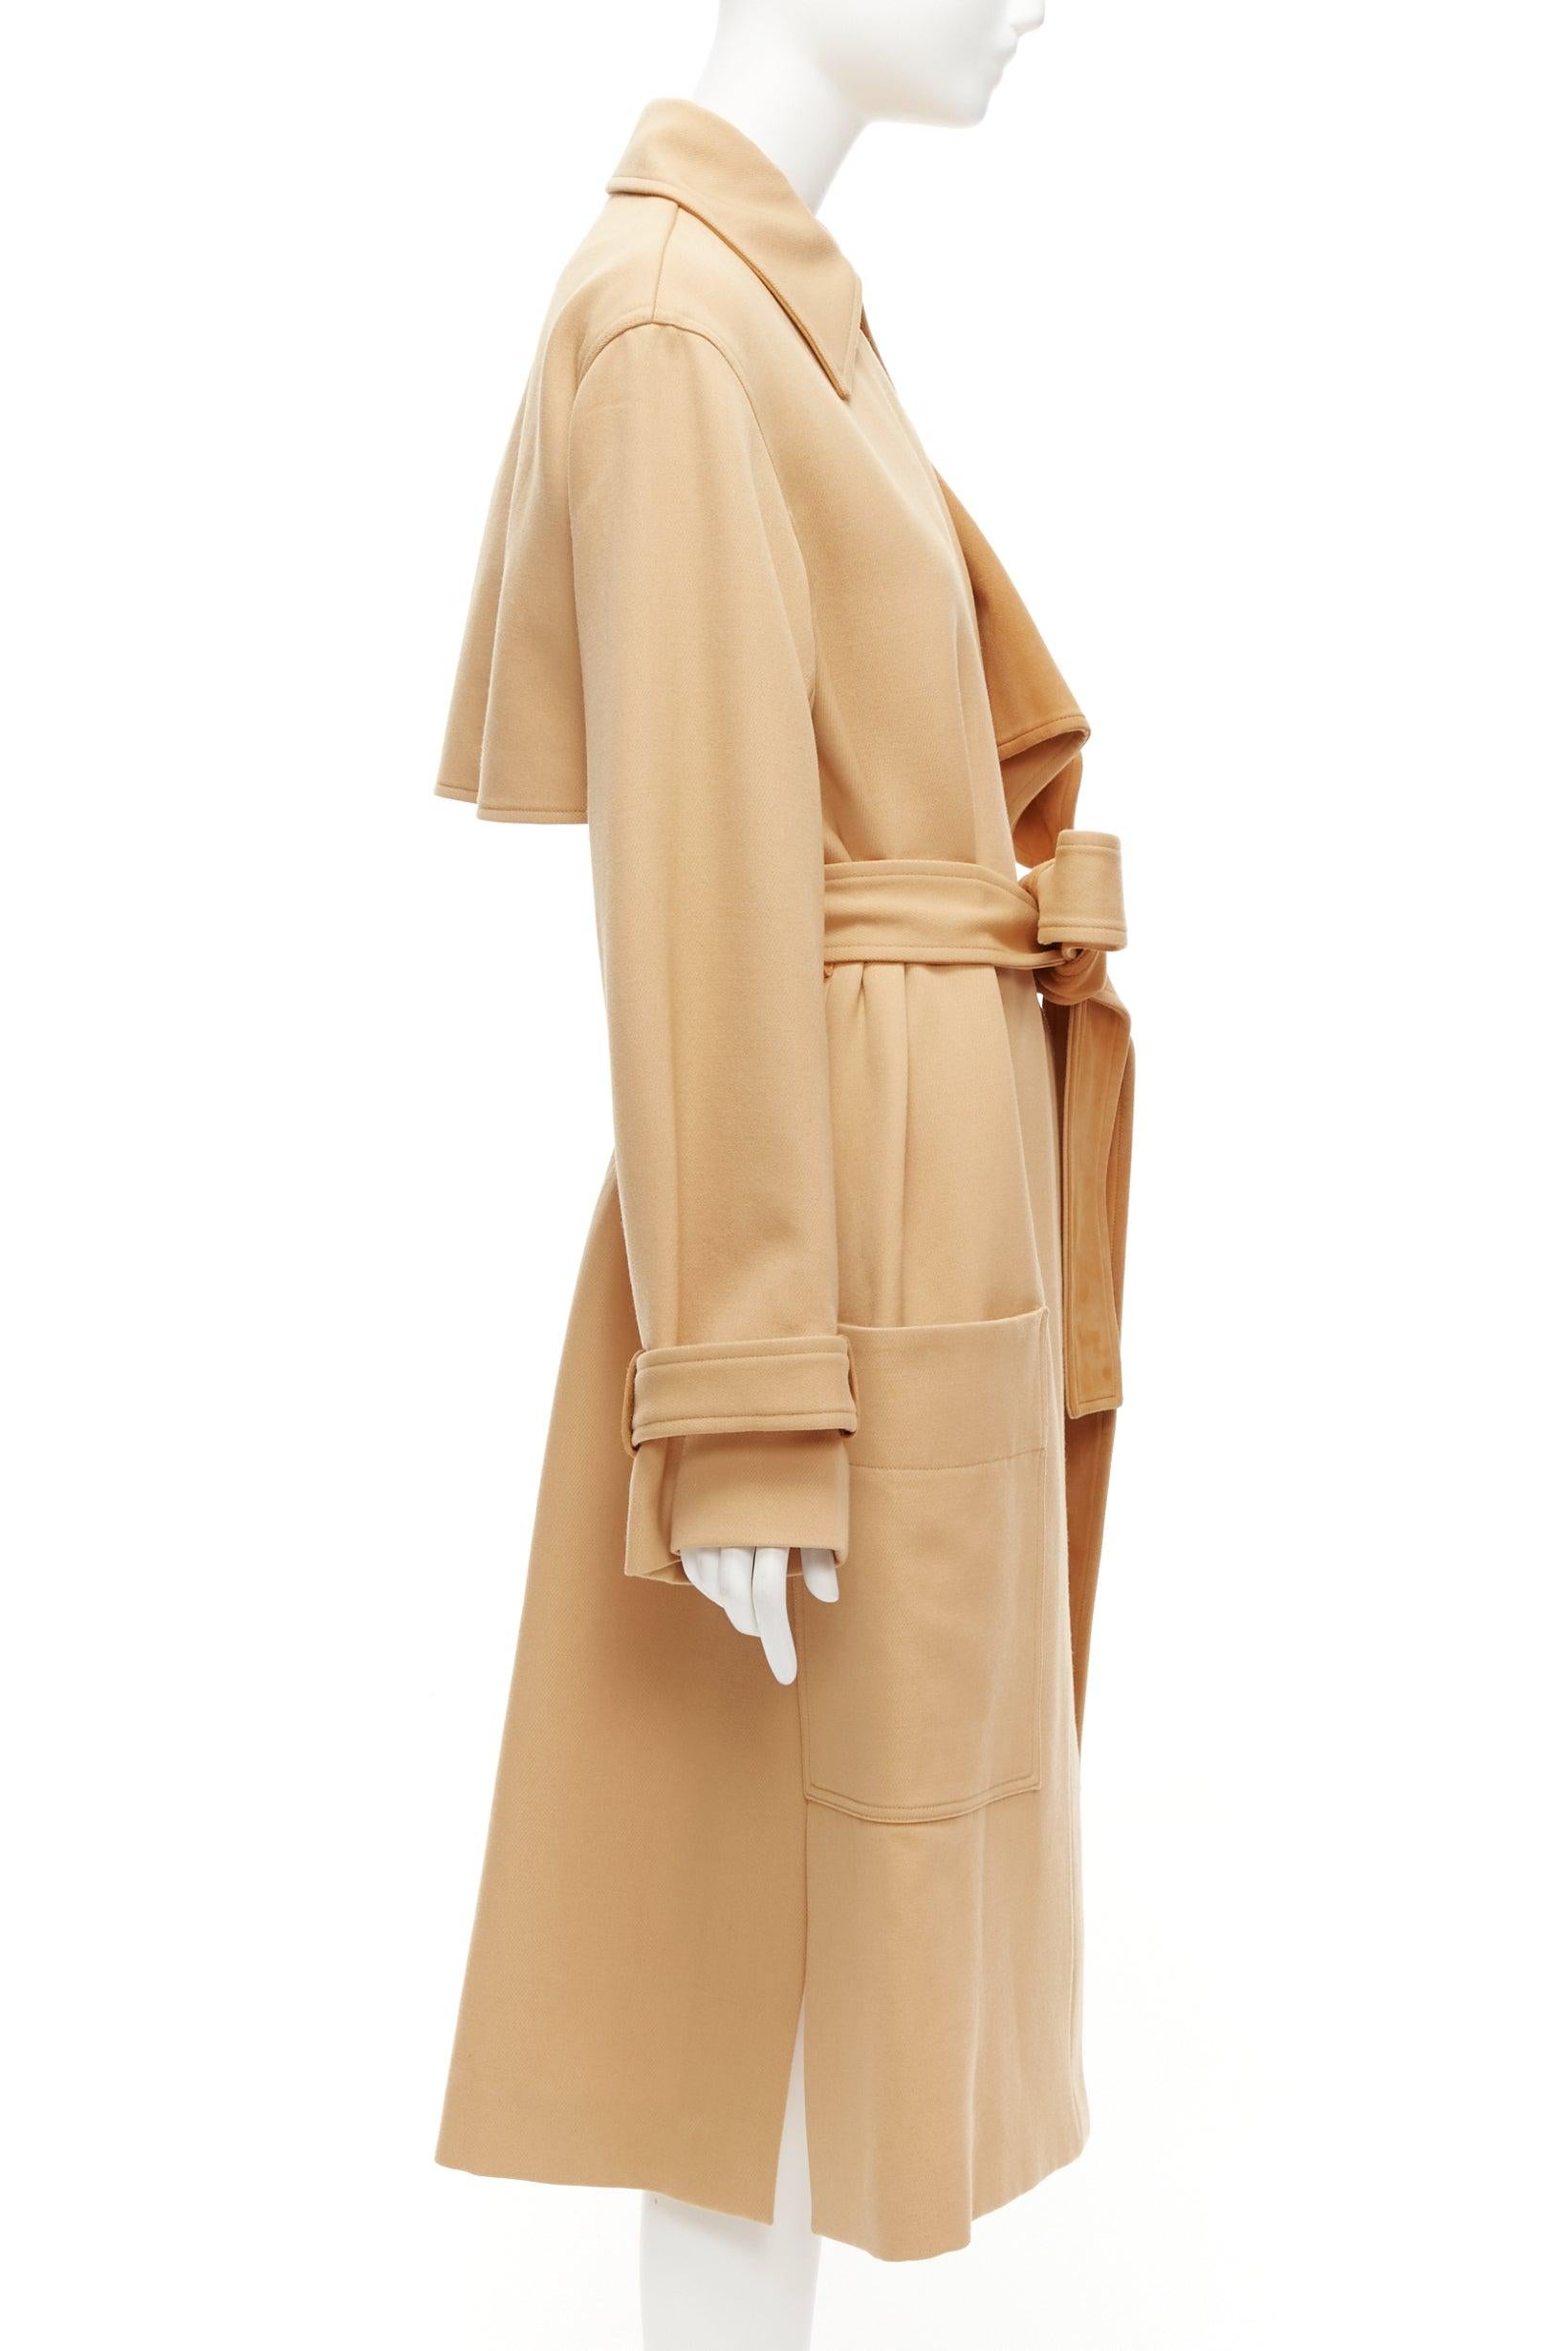 OLD CELINE Phoebe Philo wool goat leather trimmed deconstructed trench coat FR38 For Sale 1